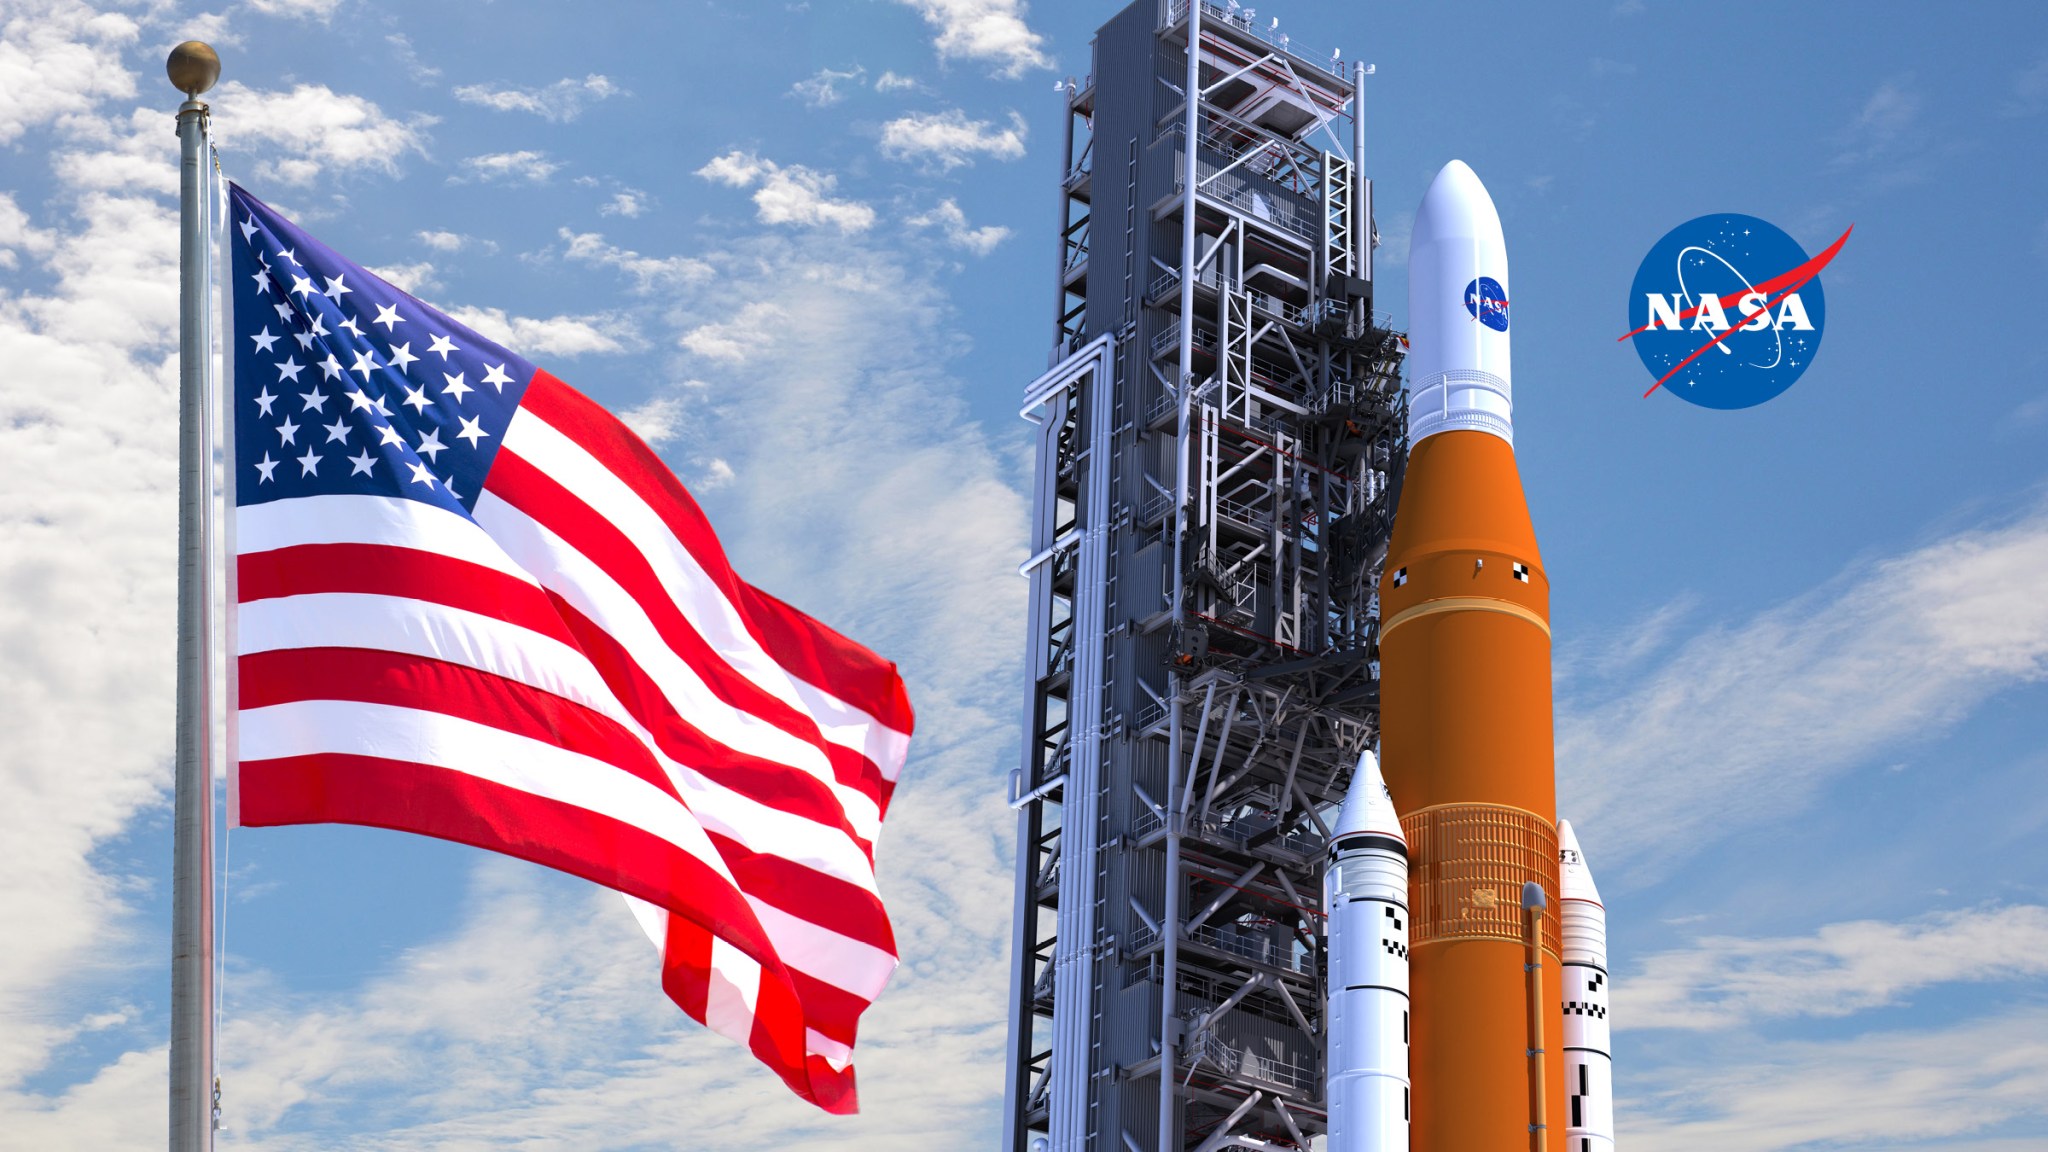 American flag waving in the wind on the left side, slightly in front of a orange and white space shuttle pointed toward the sky.